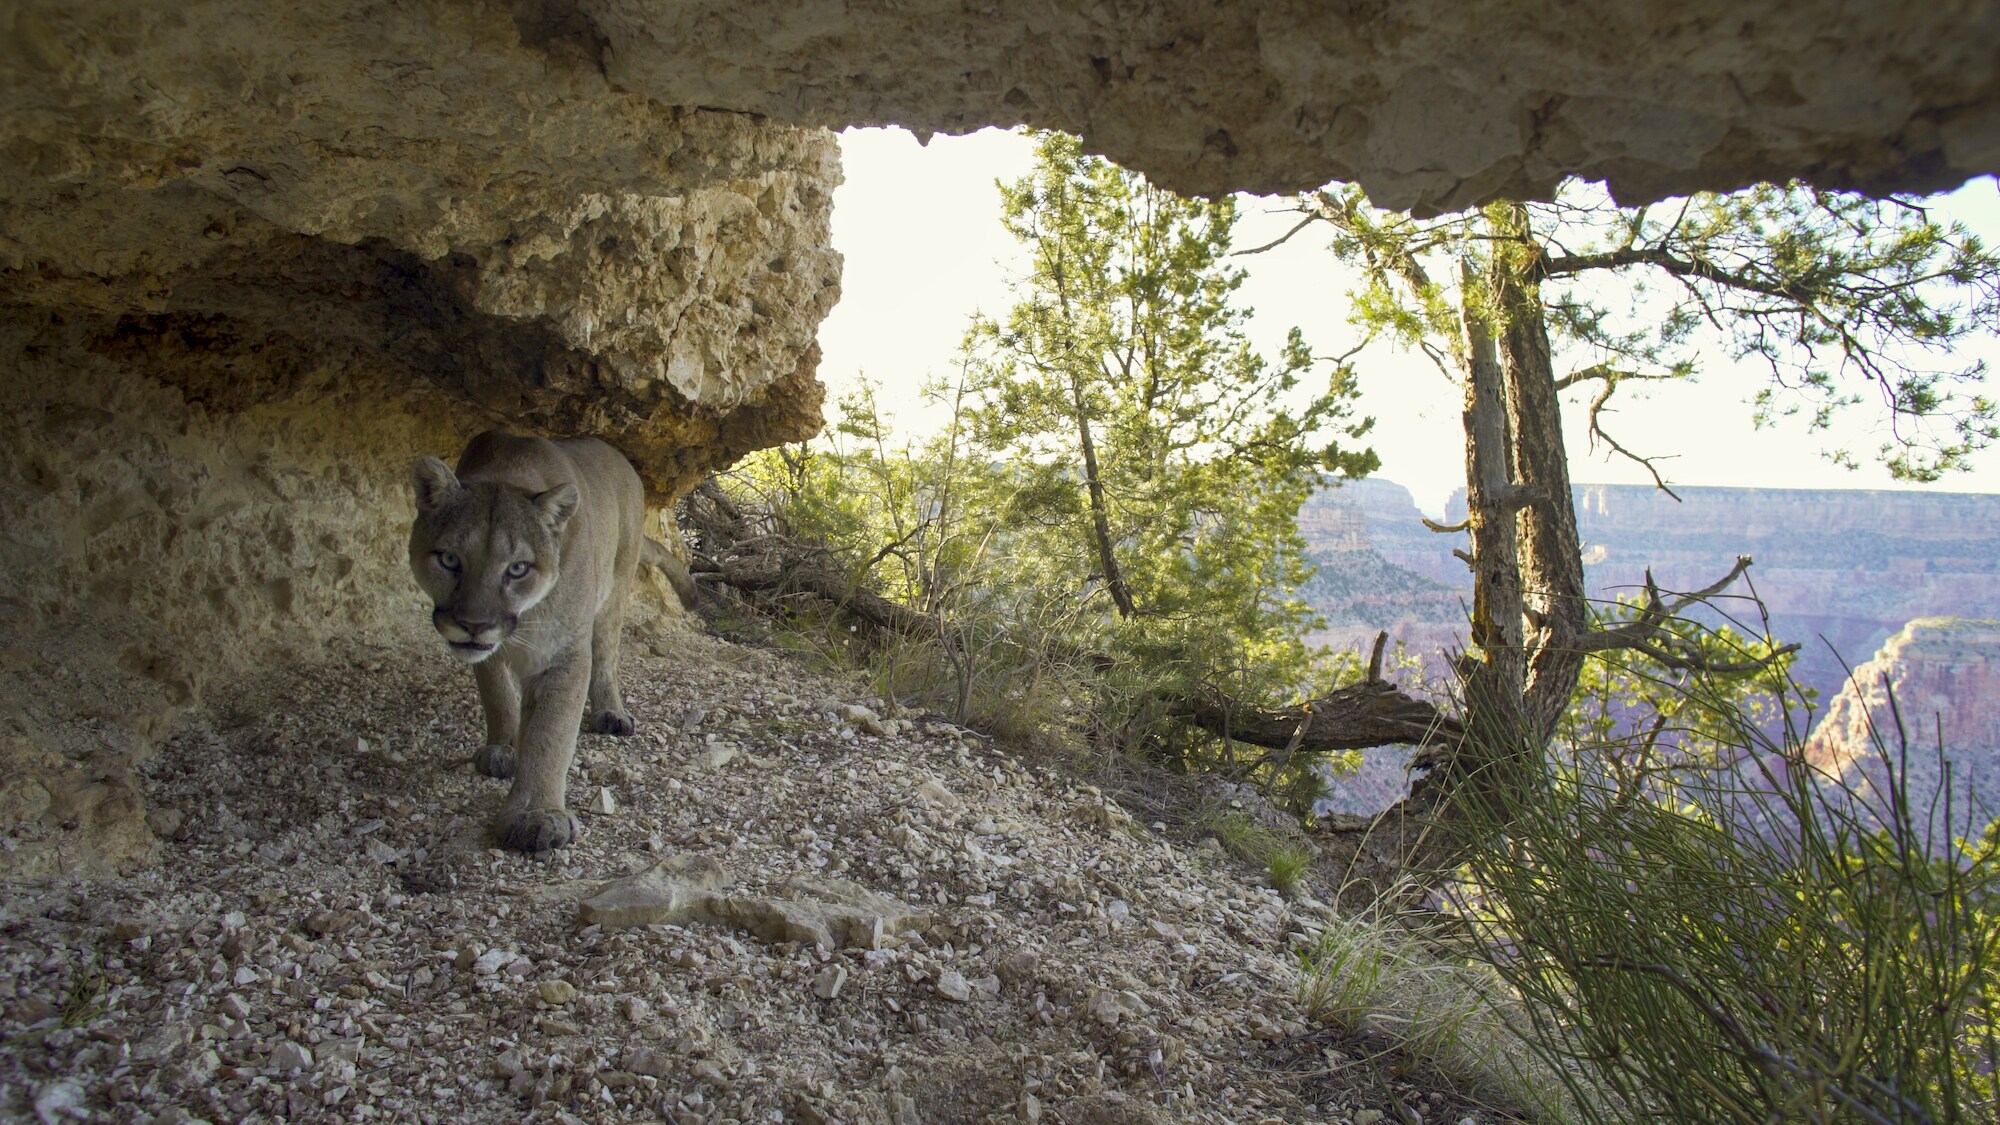 A mountain lion takes shelter from the heat under and overhang in the Grand Canyon, AZ. (National Geographic for Disney+)